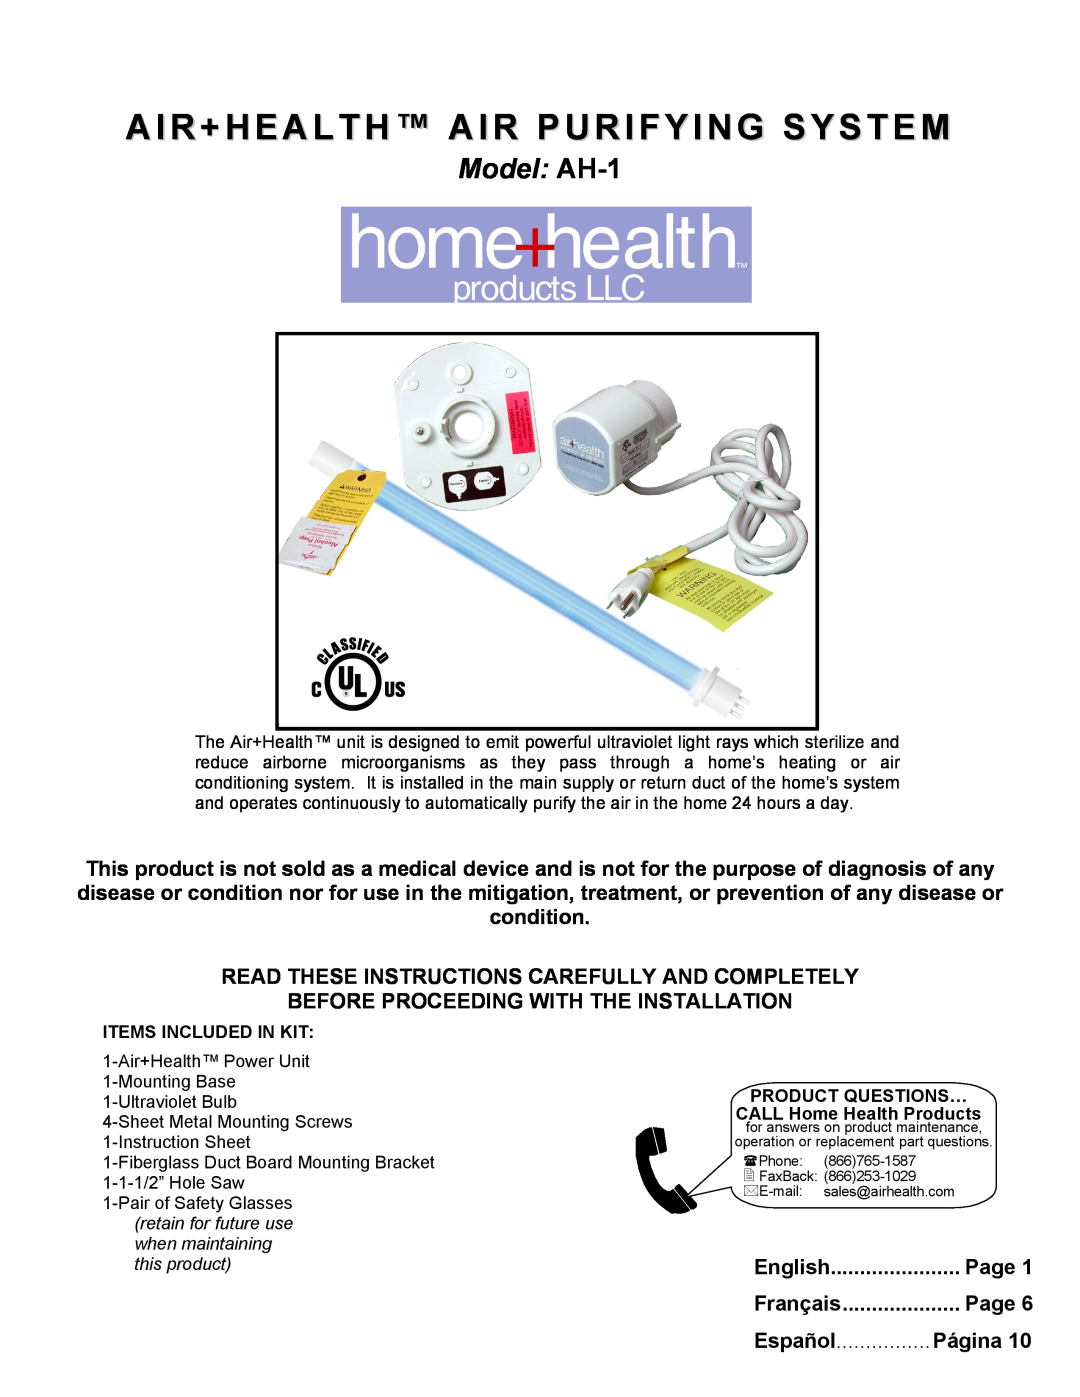 Air Health instruction sheet Air+Health Air Purifying System, Model AH-1, Before Proceeding With The Installation, Page 